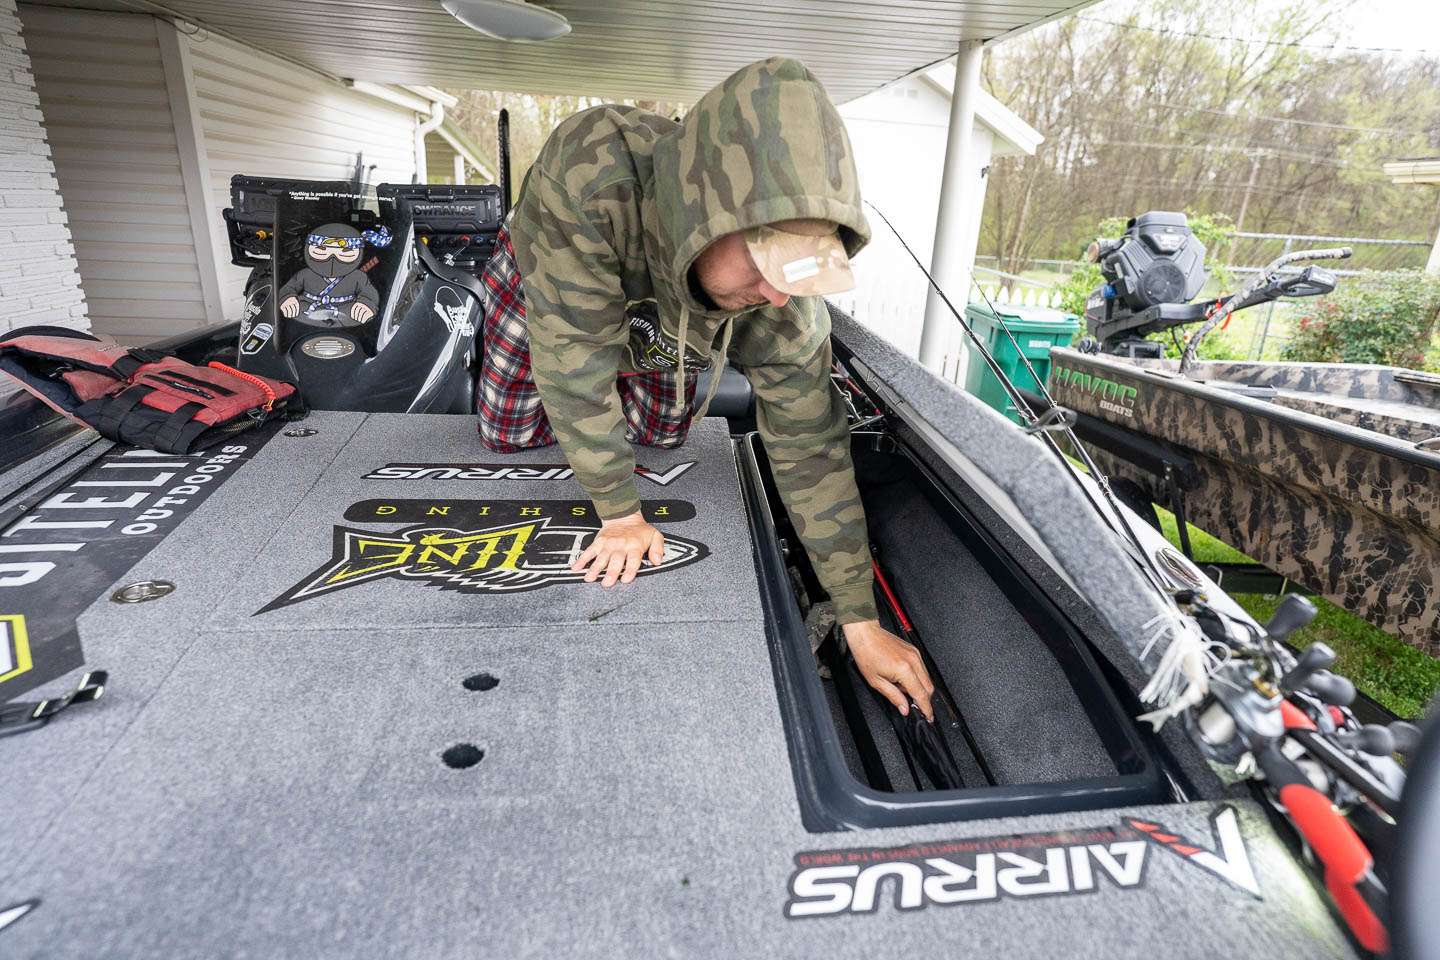 Compared to some pros, his rod locker was not too full. He had already culled down to what he would be using this week. 